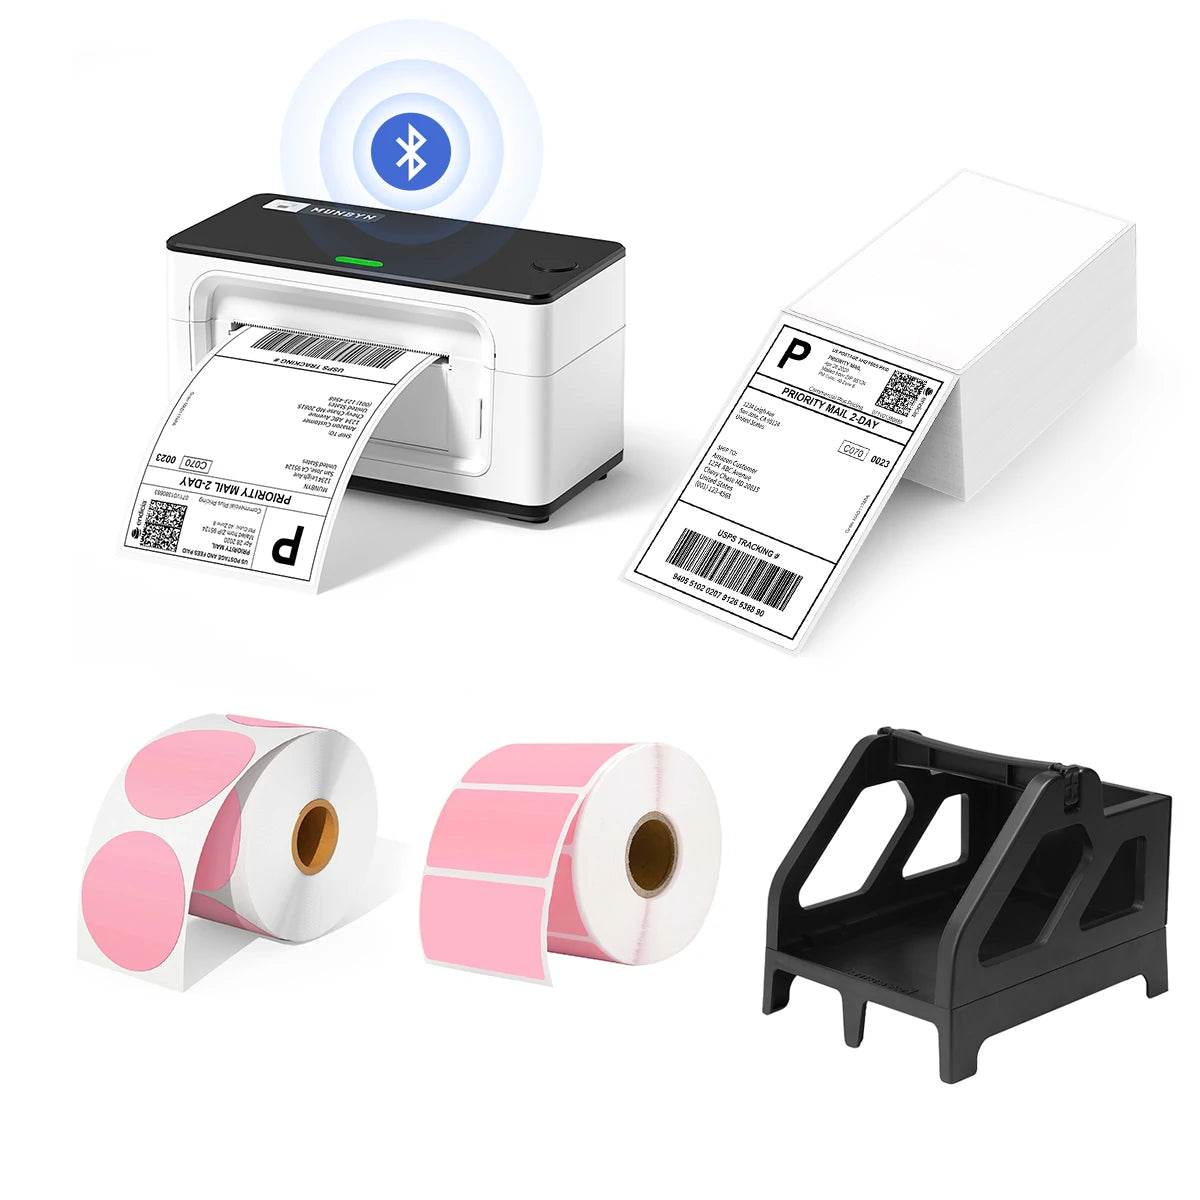 MUNBYN P941B white printer kit includes a label printer, a balck label holder, two rolls of pink labels and a stack of shipping labels.